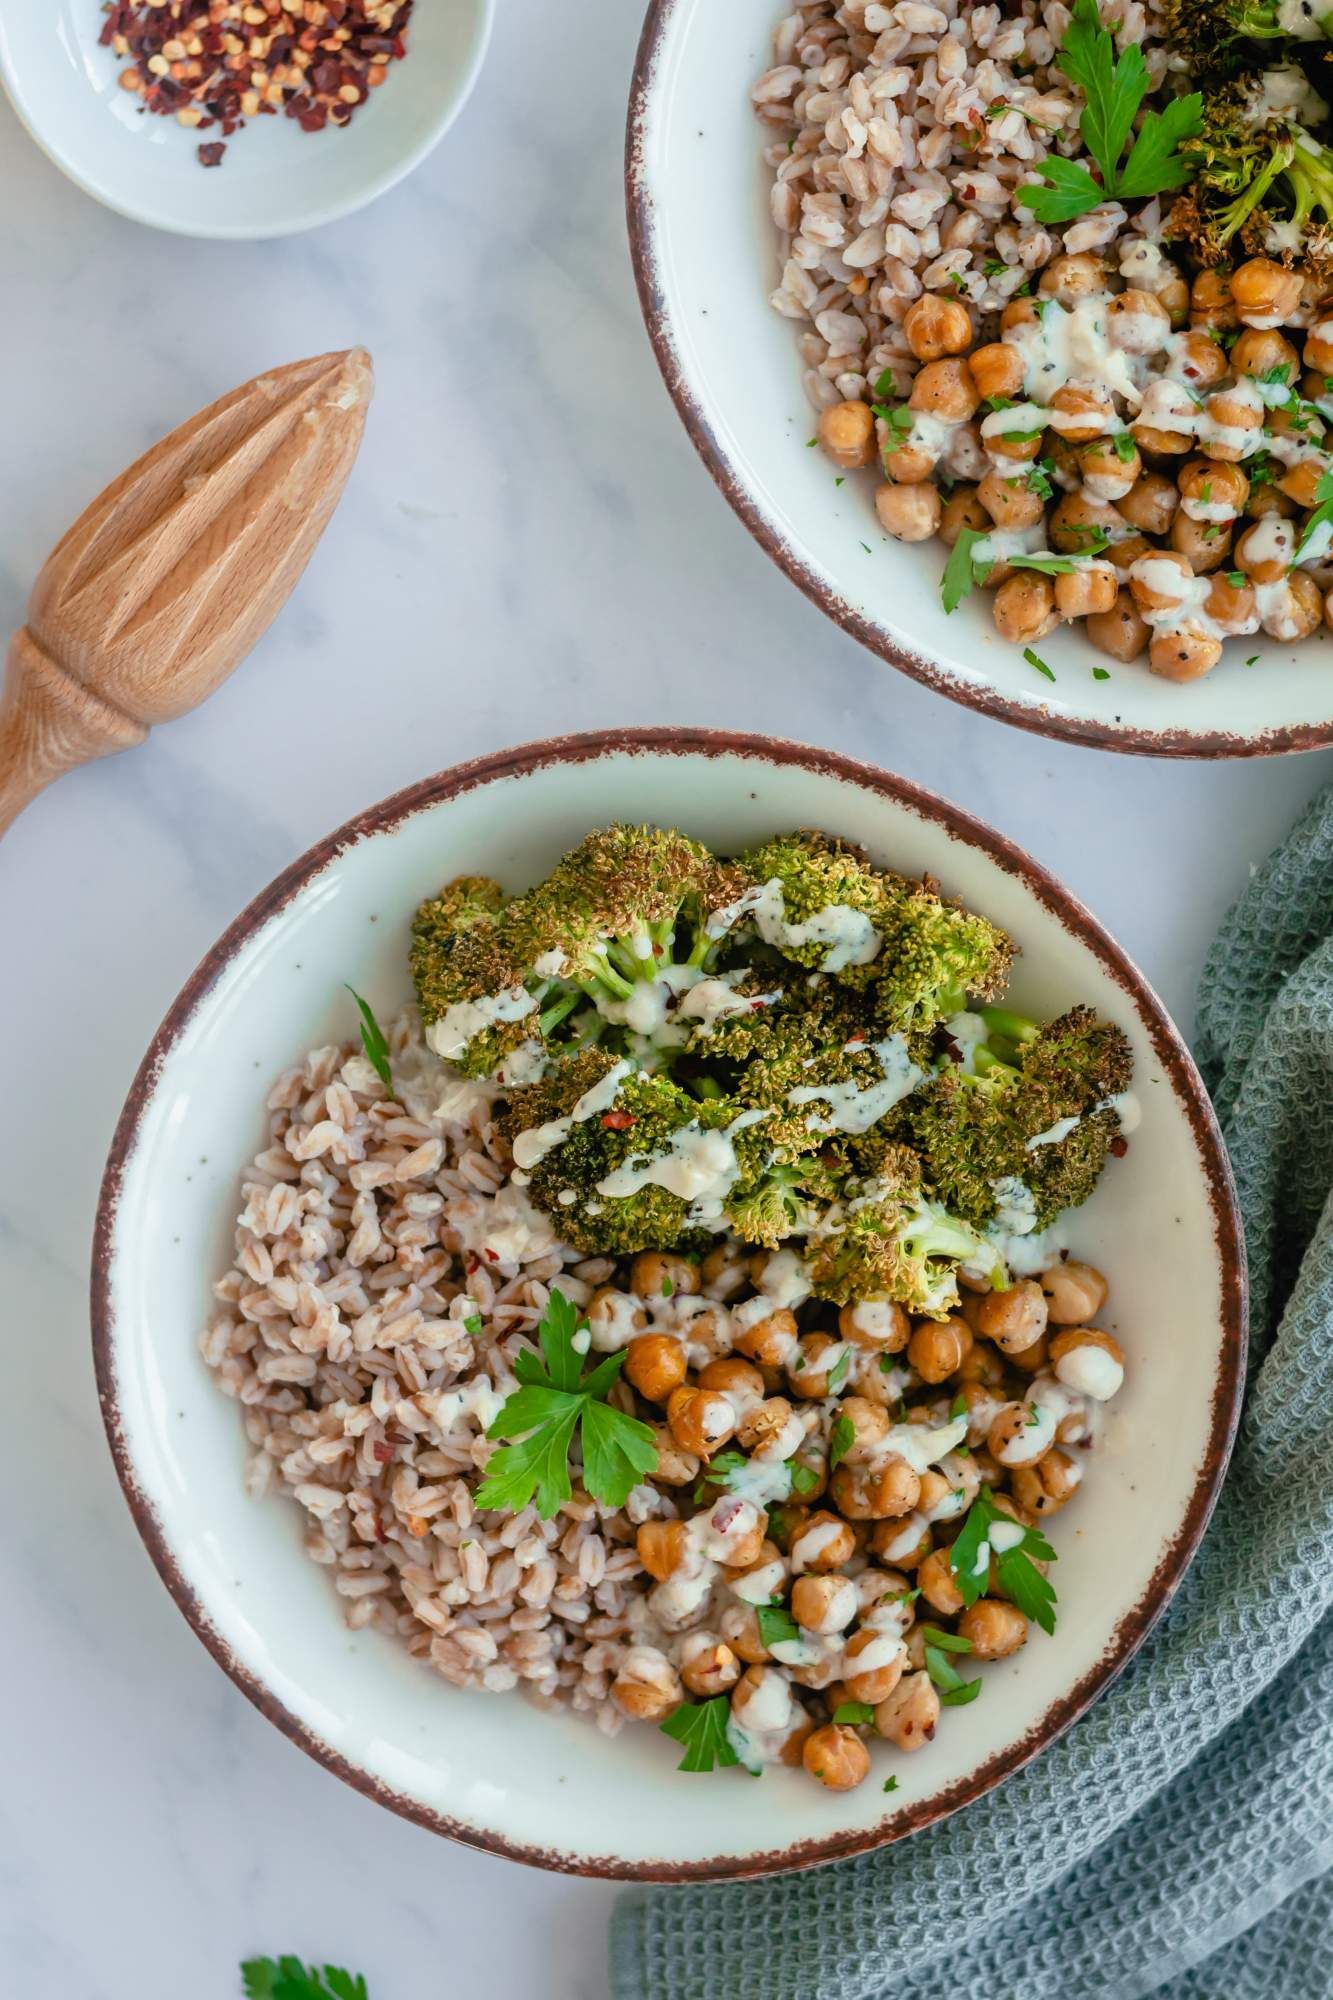 Farro broccoli bowls with chickpeas and cooked farro in a bowl with garlic tahini sauce.